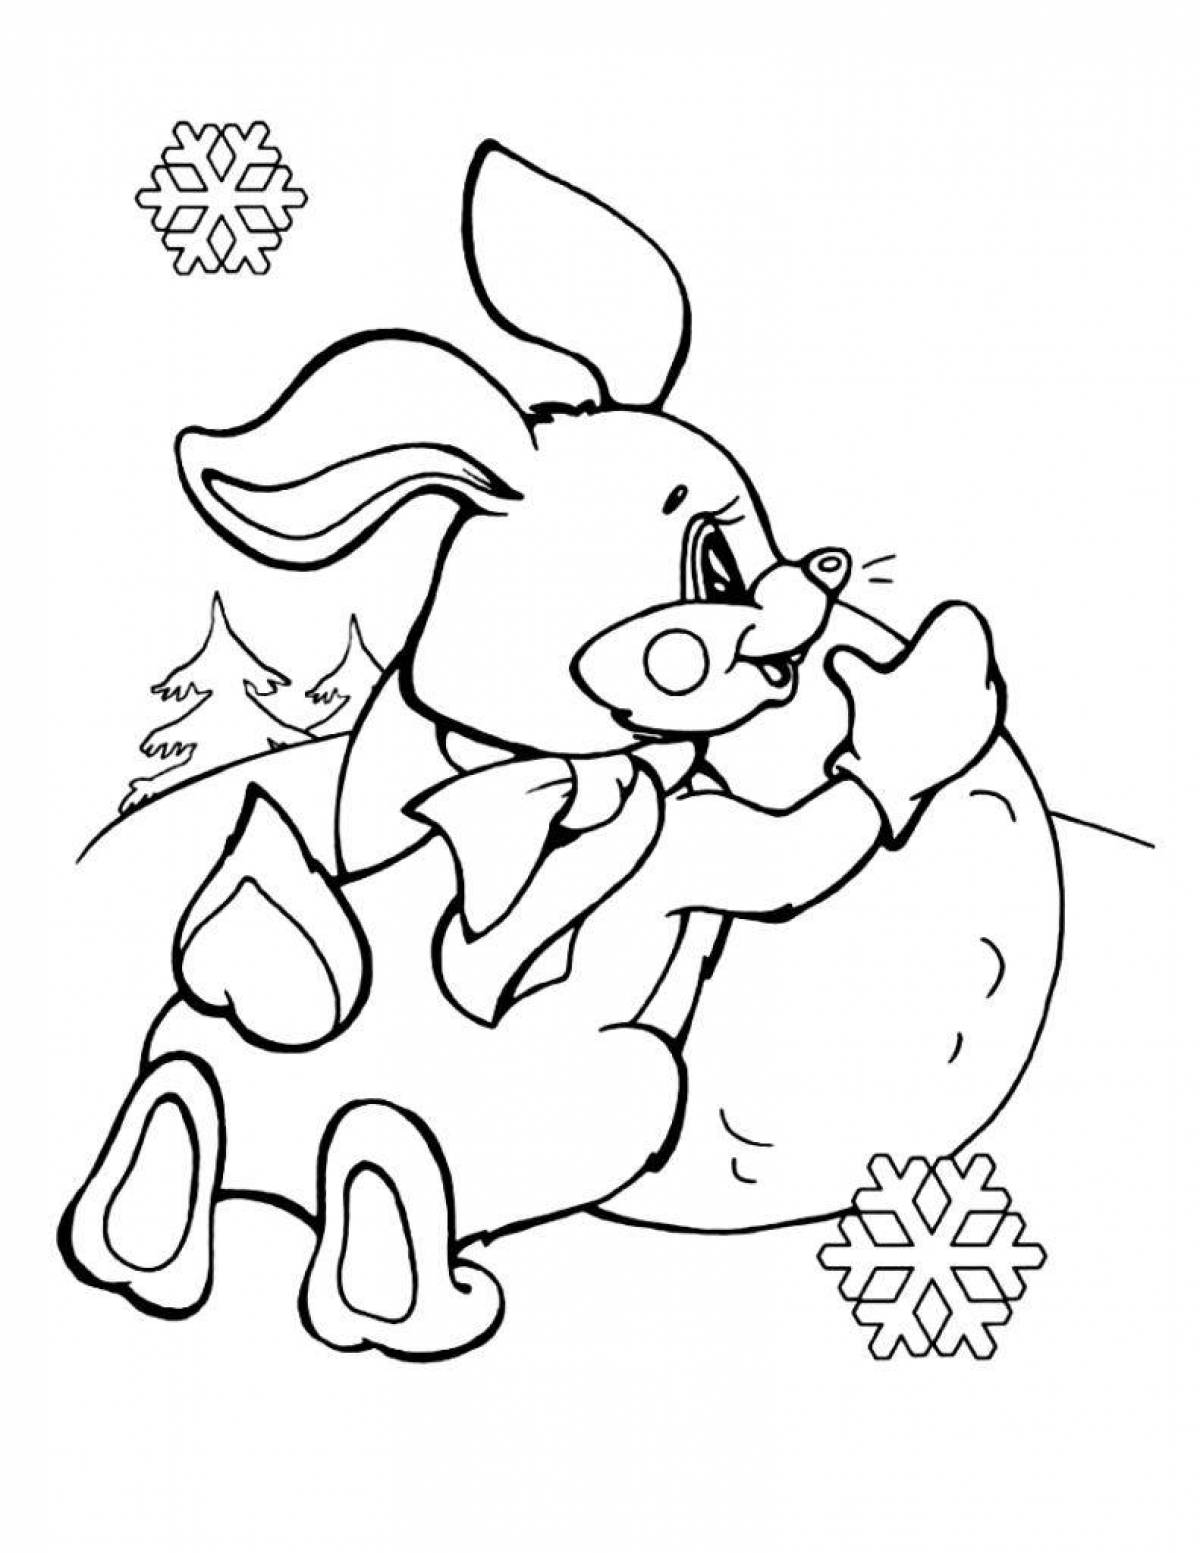 New year hare #5